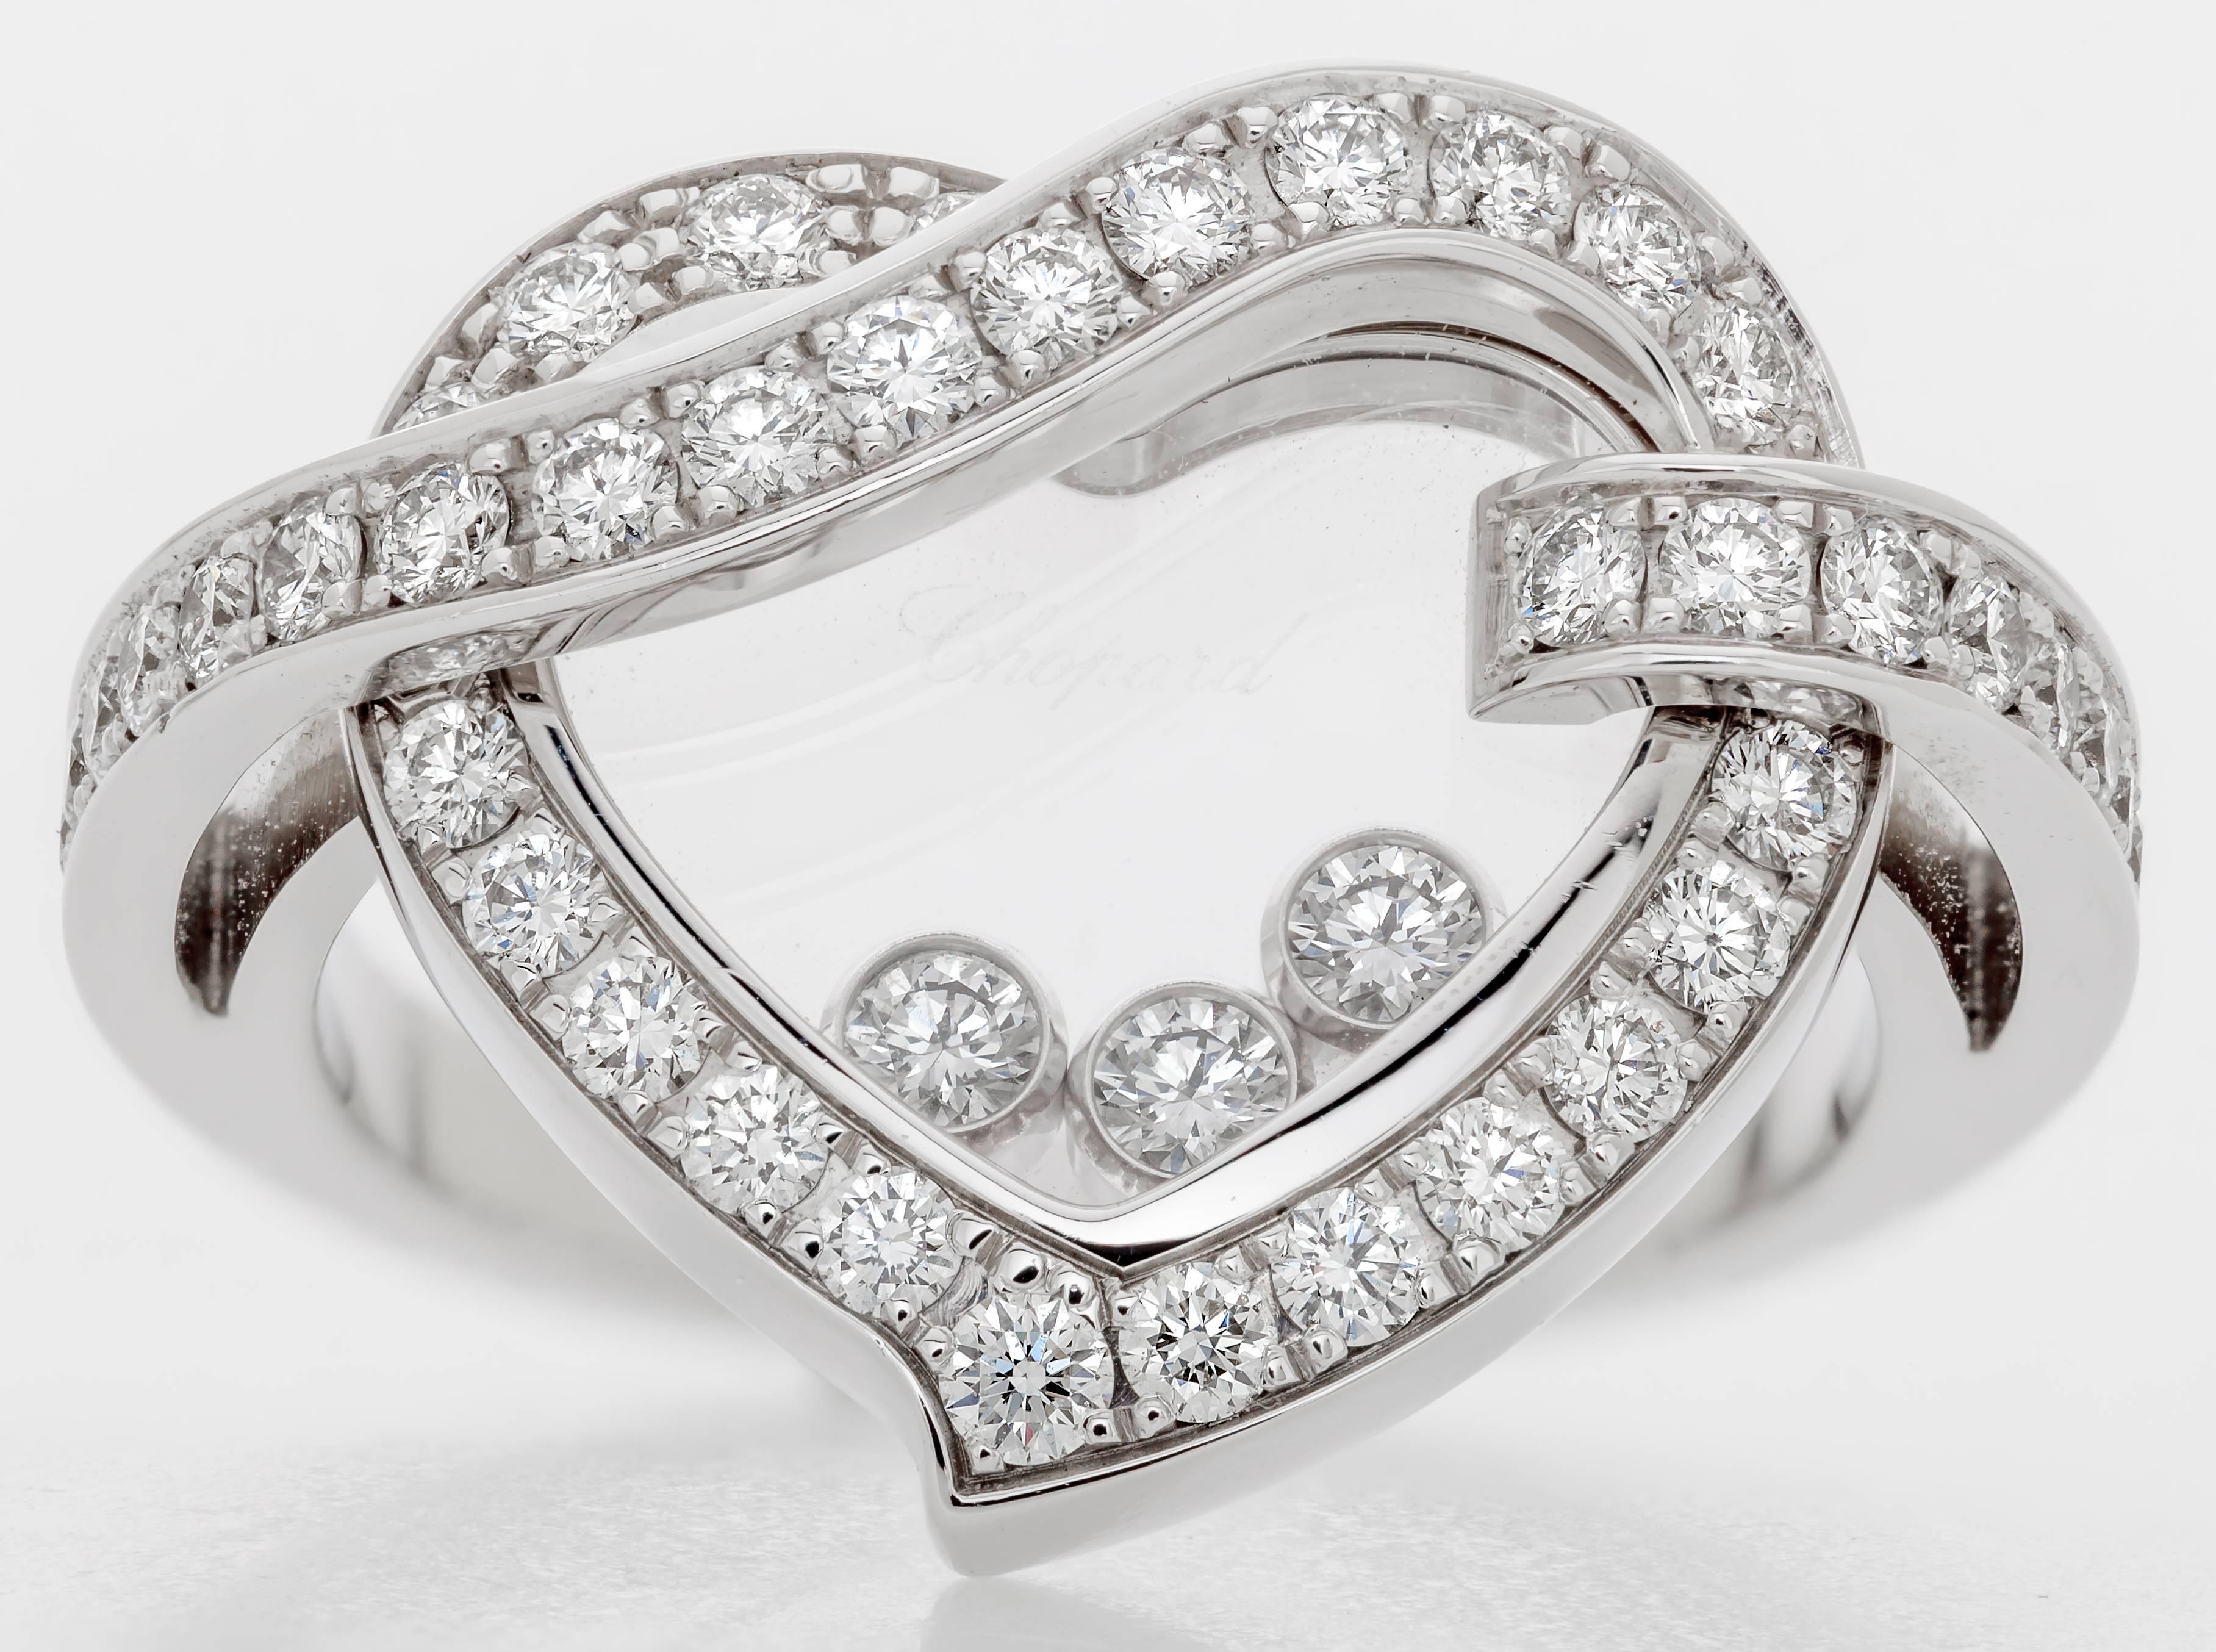 This new Chopard Happy Heart diamond ring features three floating diamonds surrounded by a heart design.  The heart contains 42 diamonds totaling 0.75ct and the 3 floating diamonds total 0.17ct.  The ring is a size 6.5 and measures 2.6cm tall, 2.3cm